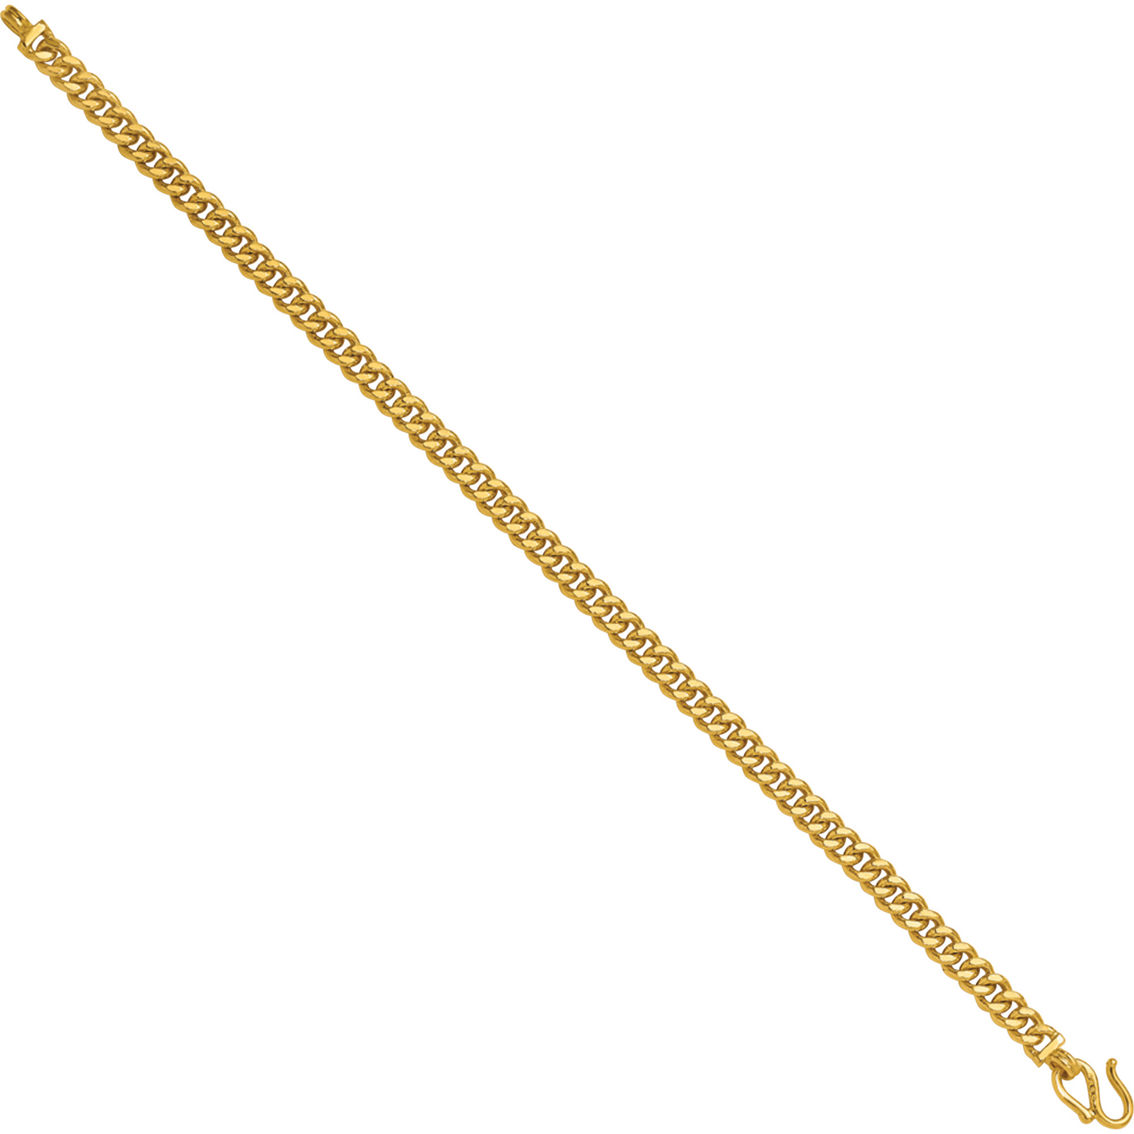 24K Pure Gold 5mm Solid Curb Chain 7.5 in. Bracelet - Image 4 of 5